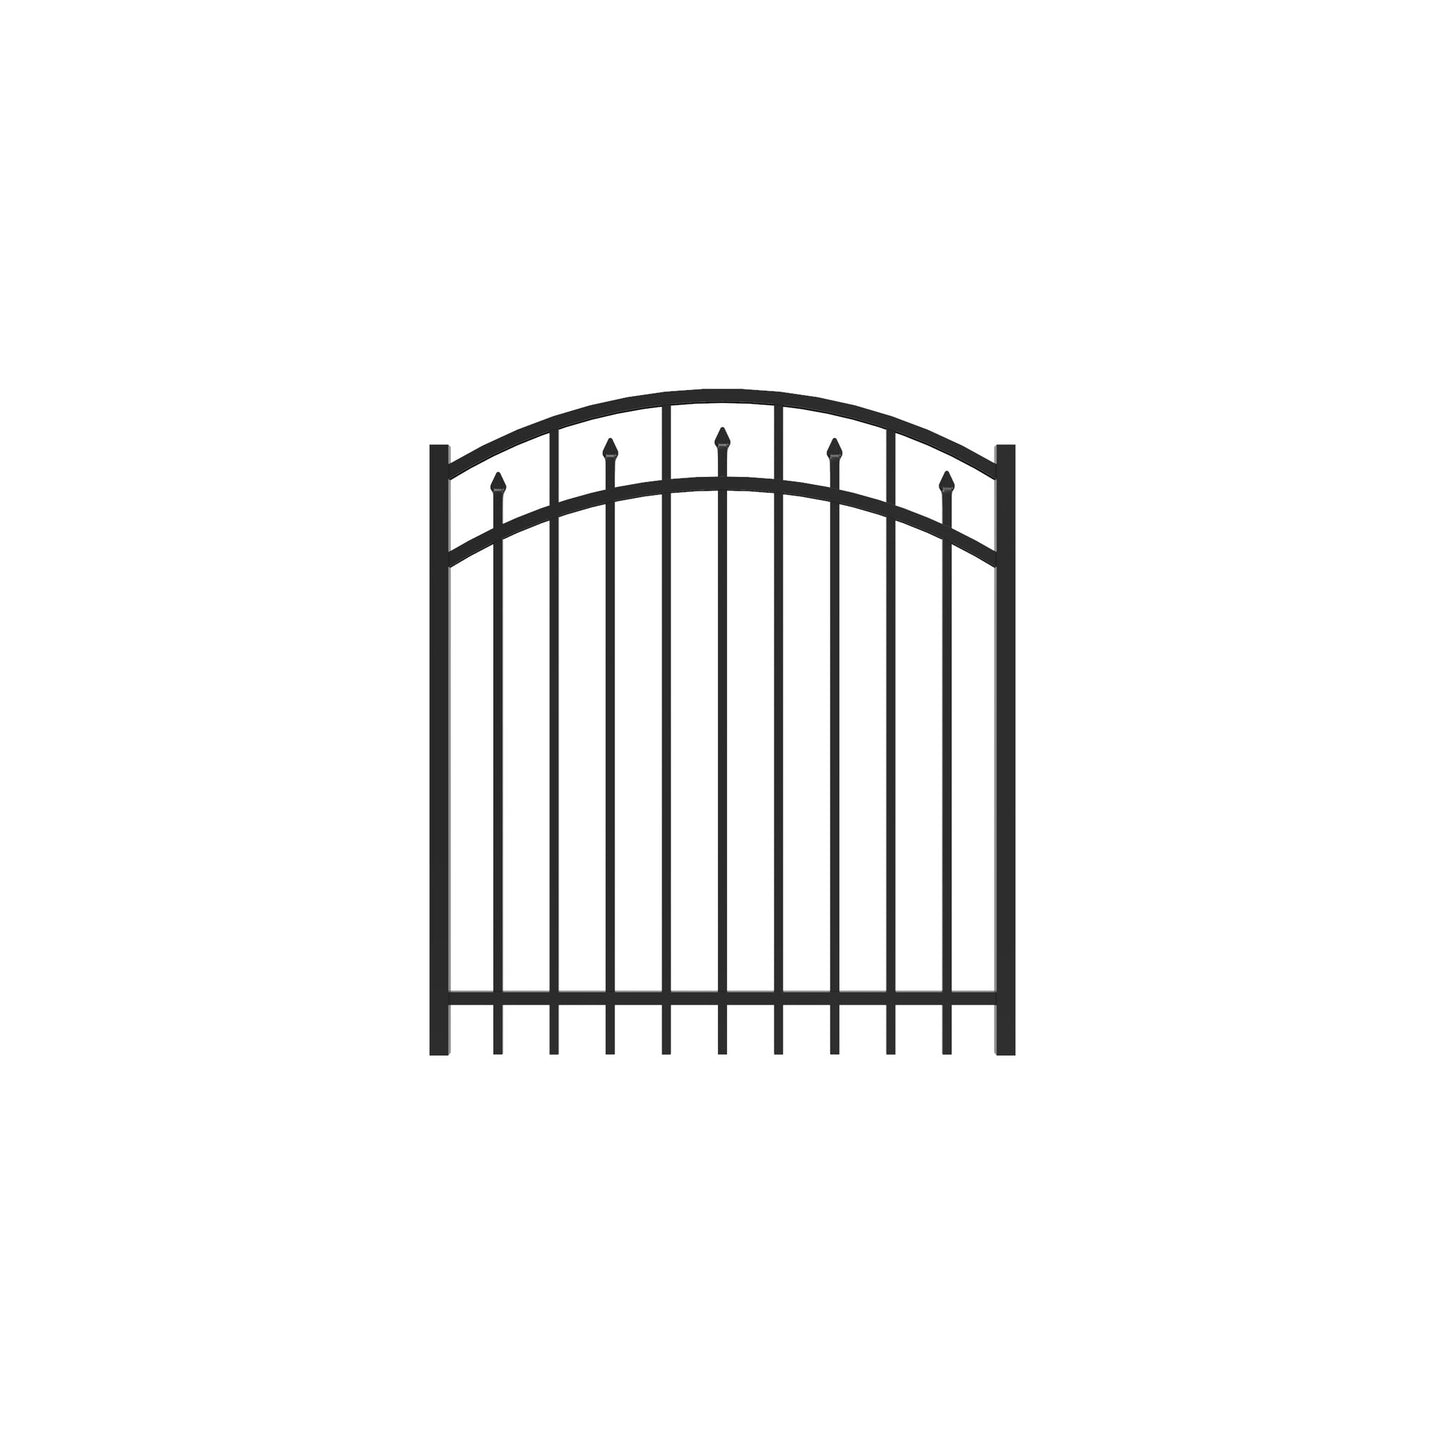 Amethyst Home Series - Arched Gate - 4' x 4'-Aluminum Fence Gates-ActiveYards-Black-FenceCenter